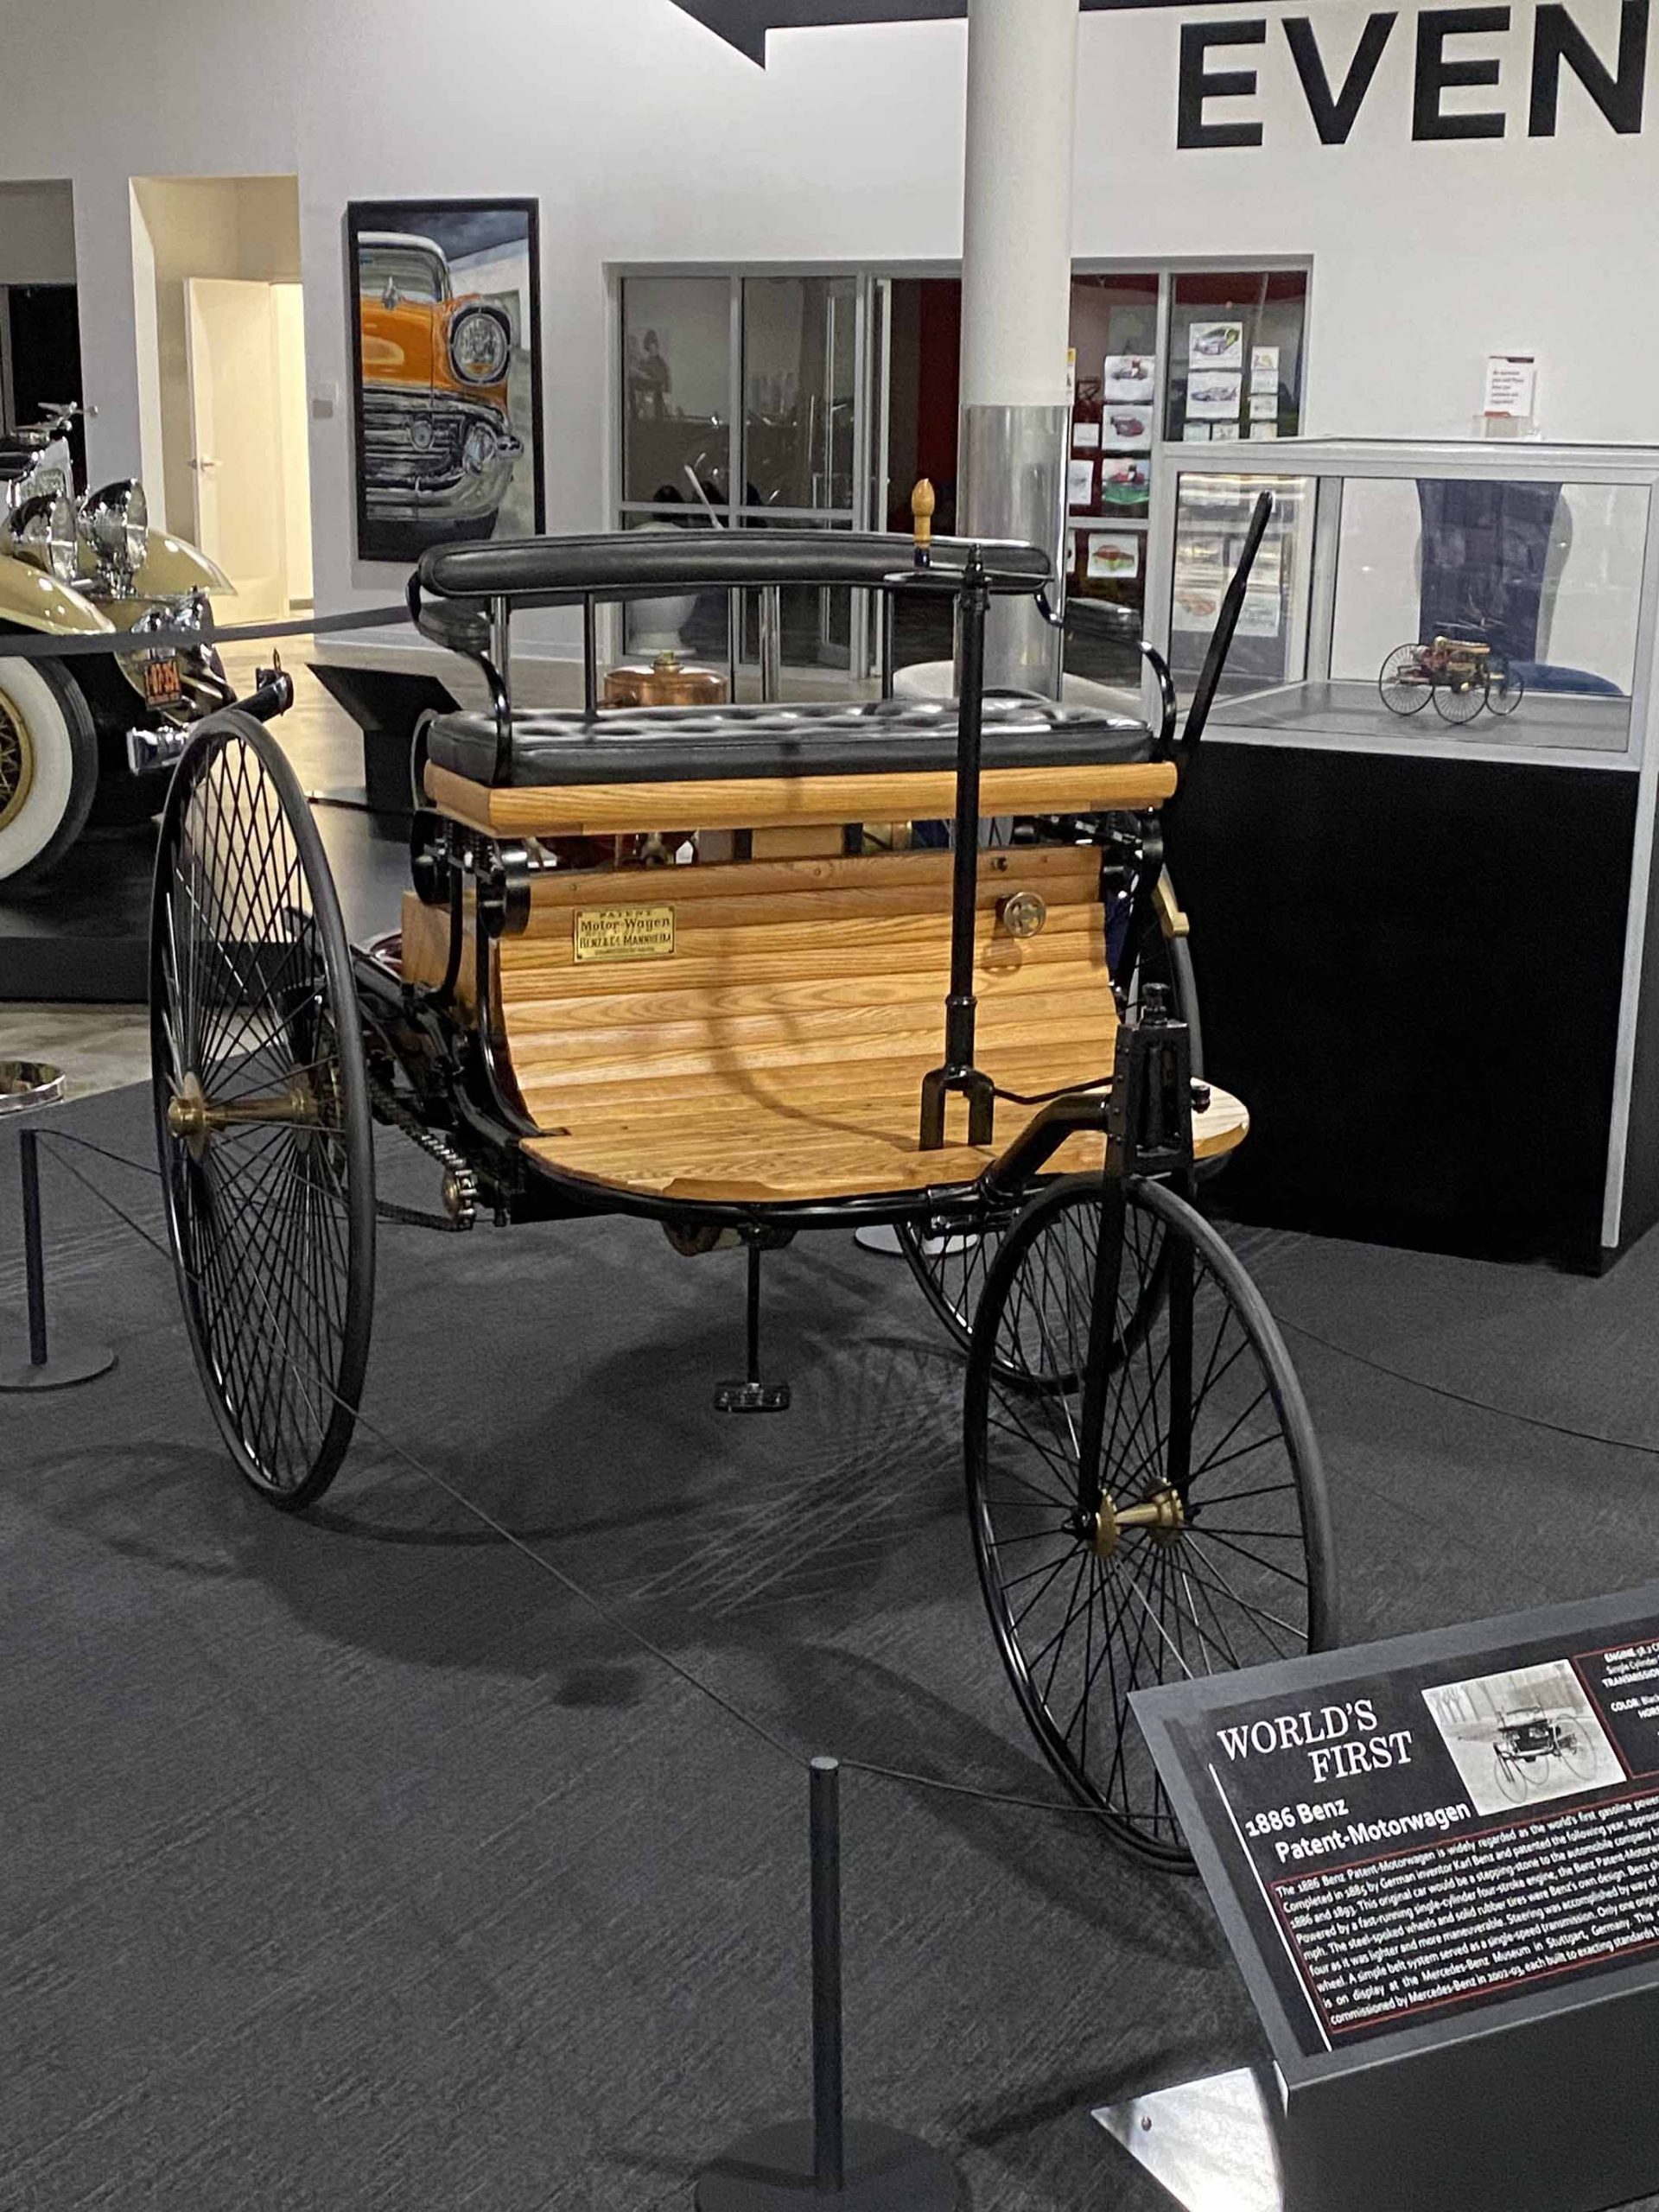 The Bertha Benz Historical Road Trip in Germany